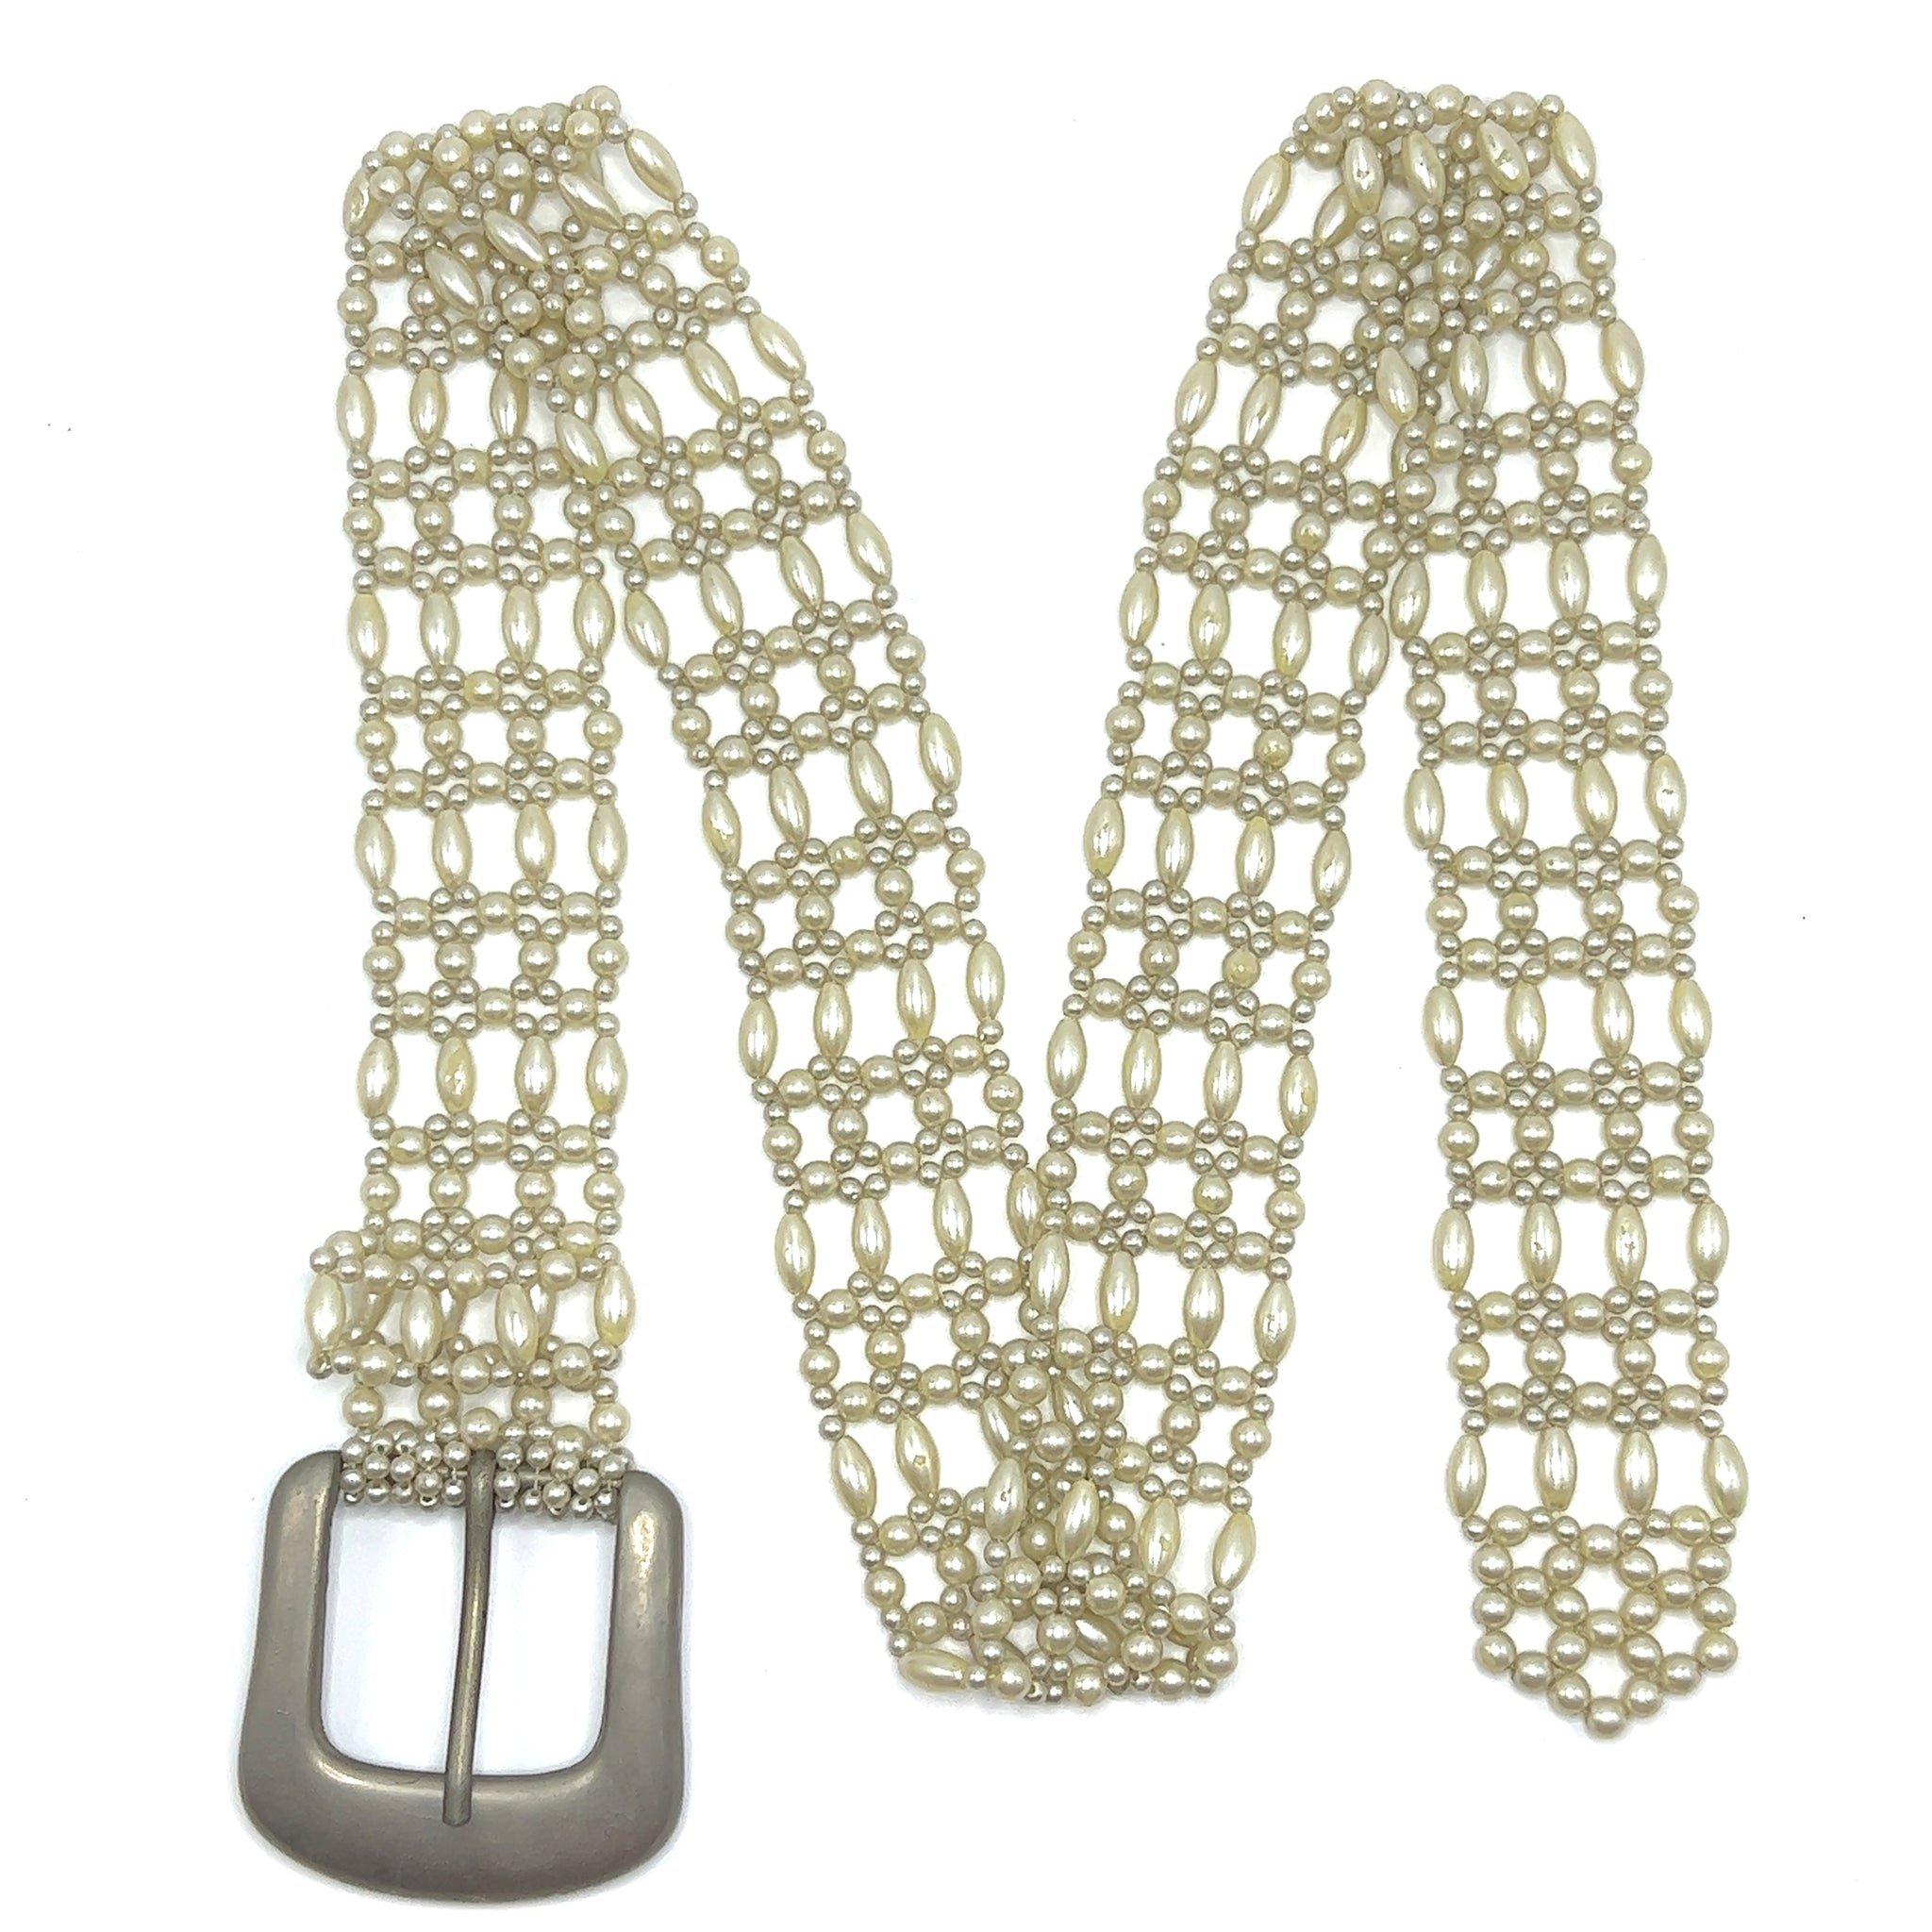 Handcrafted Pearl Fusion of Drop and Round Shaped Buckled Belt Unique Giftware